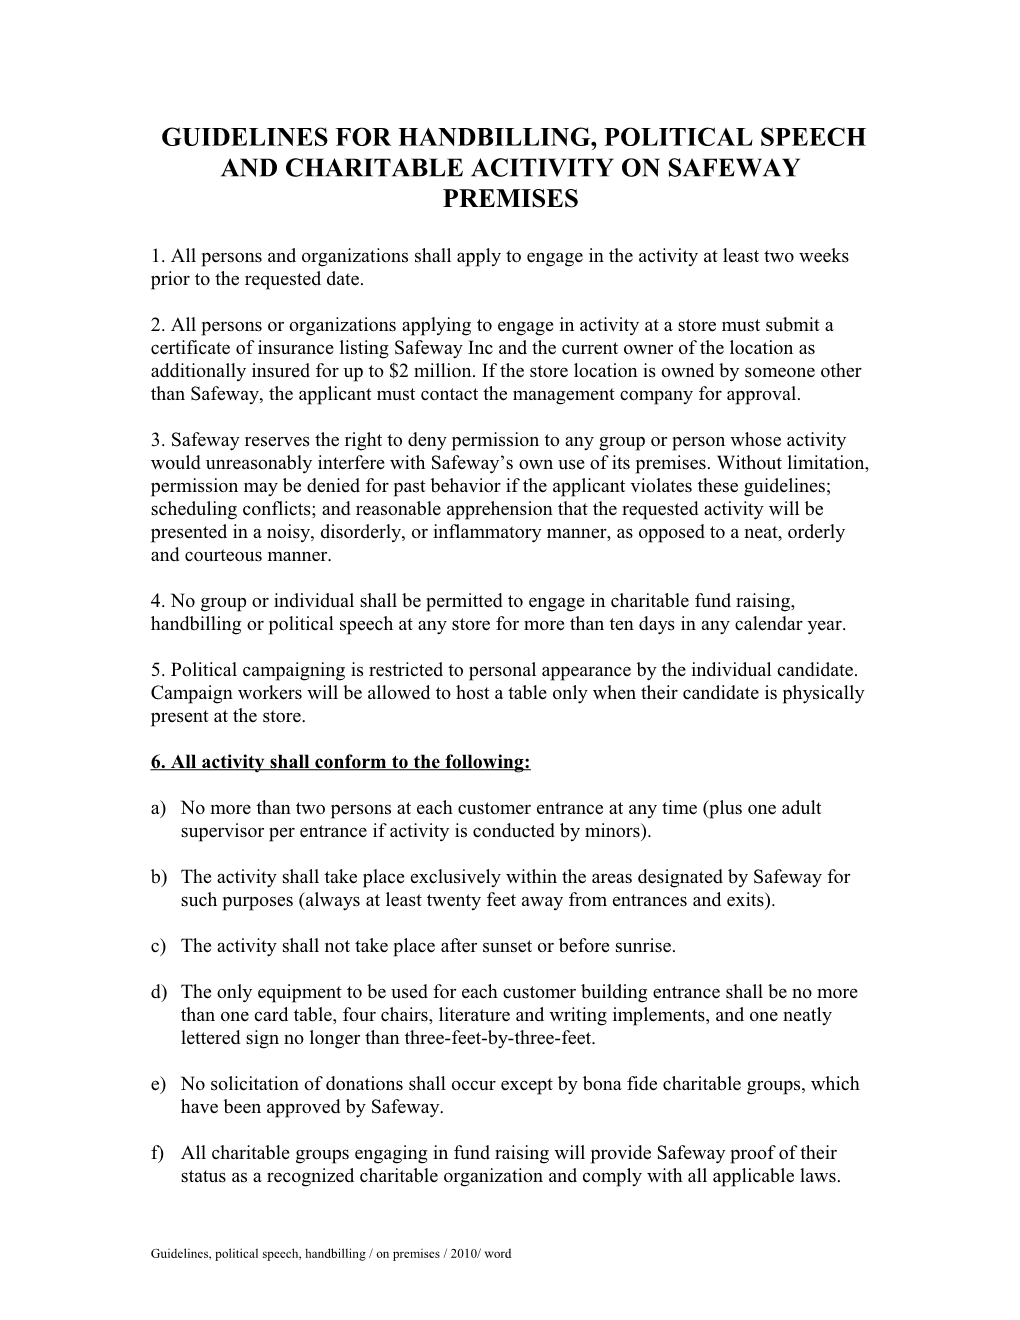 Guidelines for Handbilling, Political, Speech and Charitable Acitivity on Safeway Premises